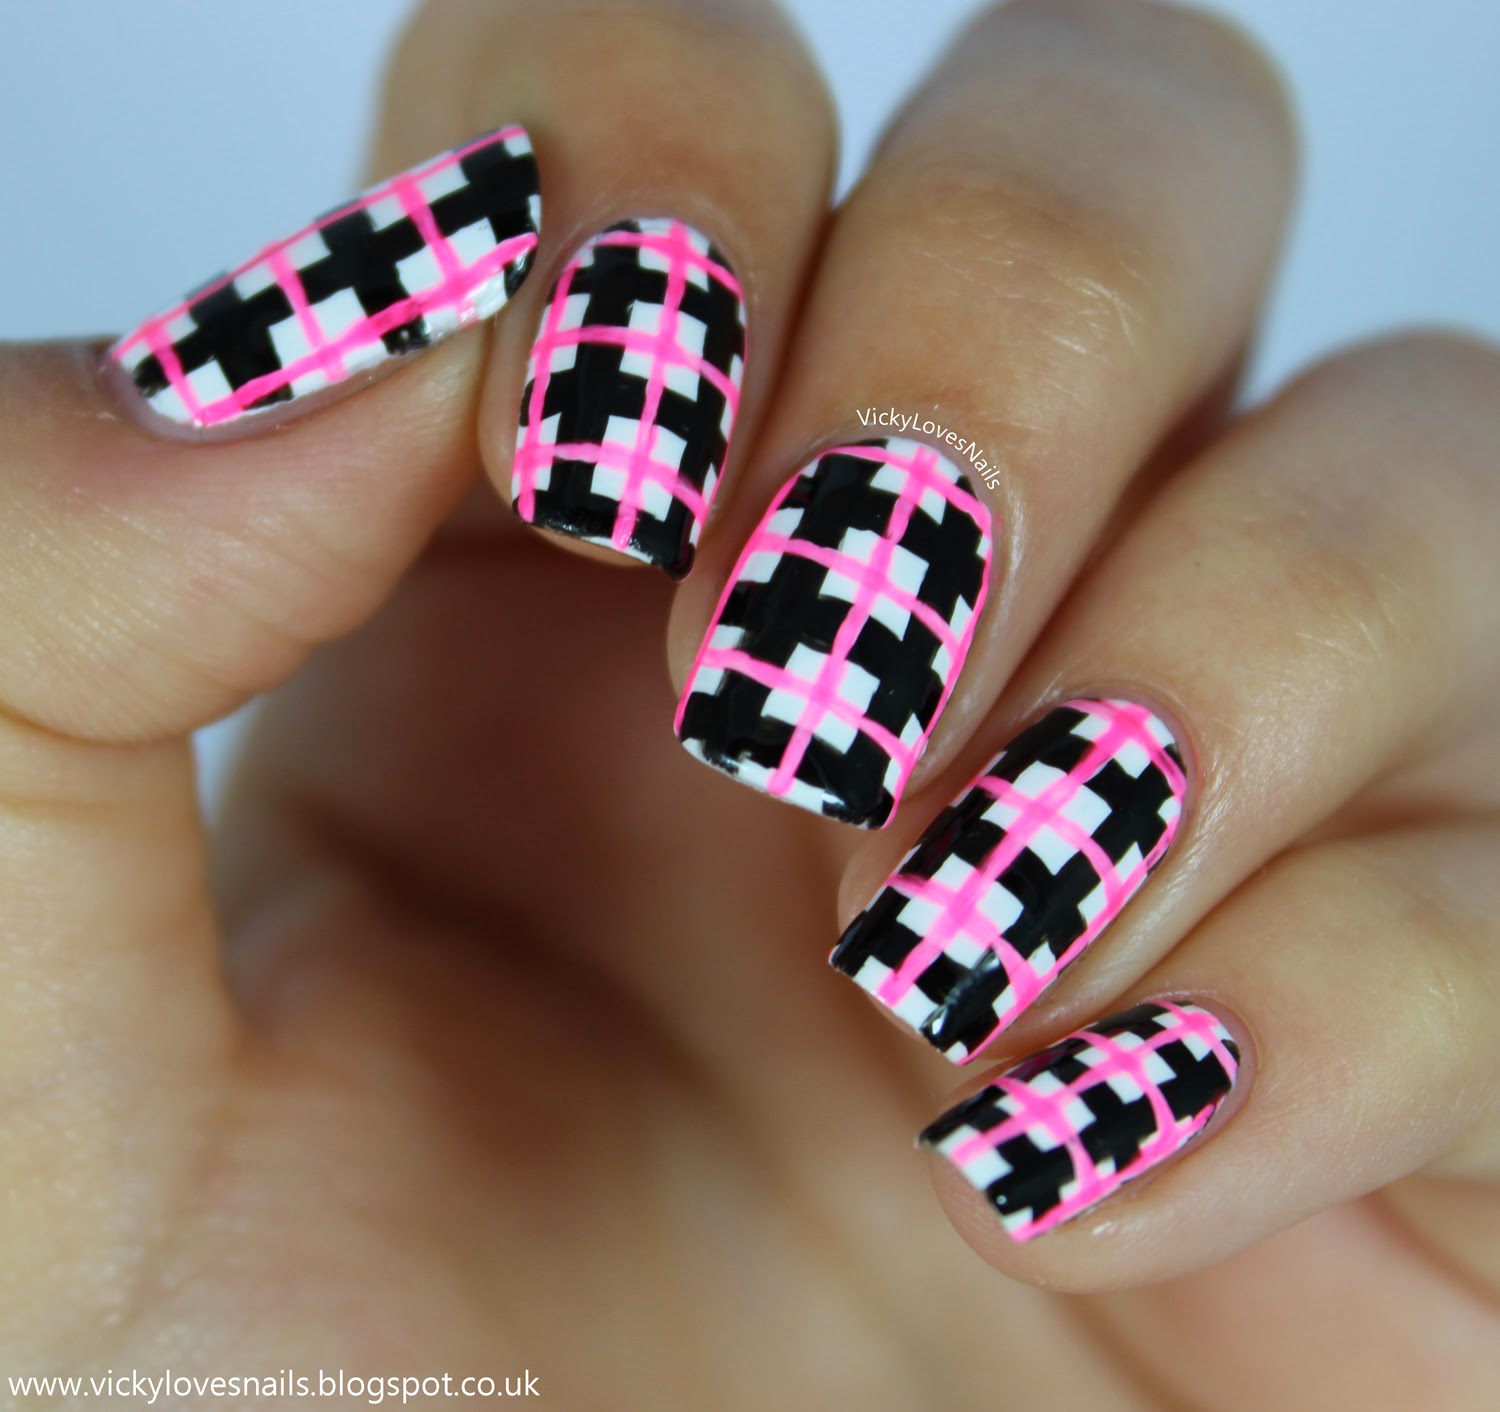 Vicky Loves Nails!: Neon Check Manicure